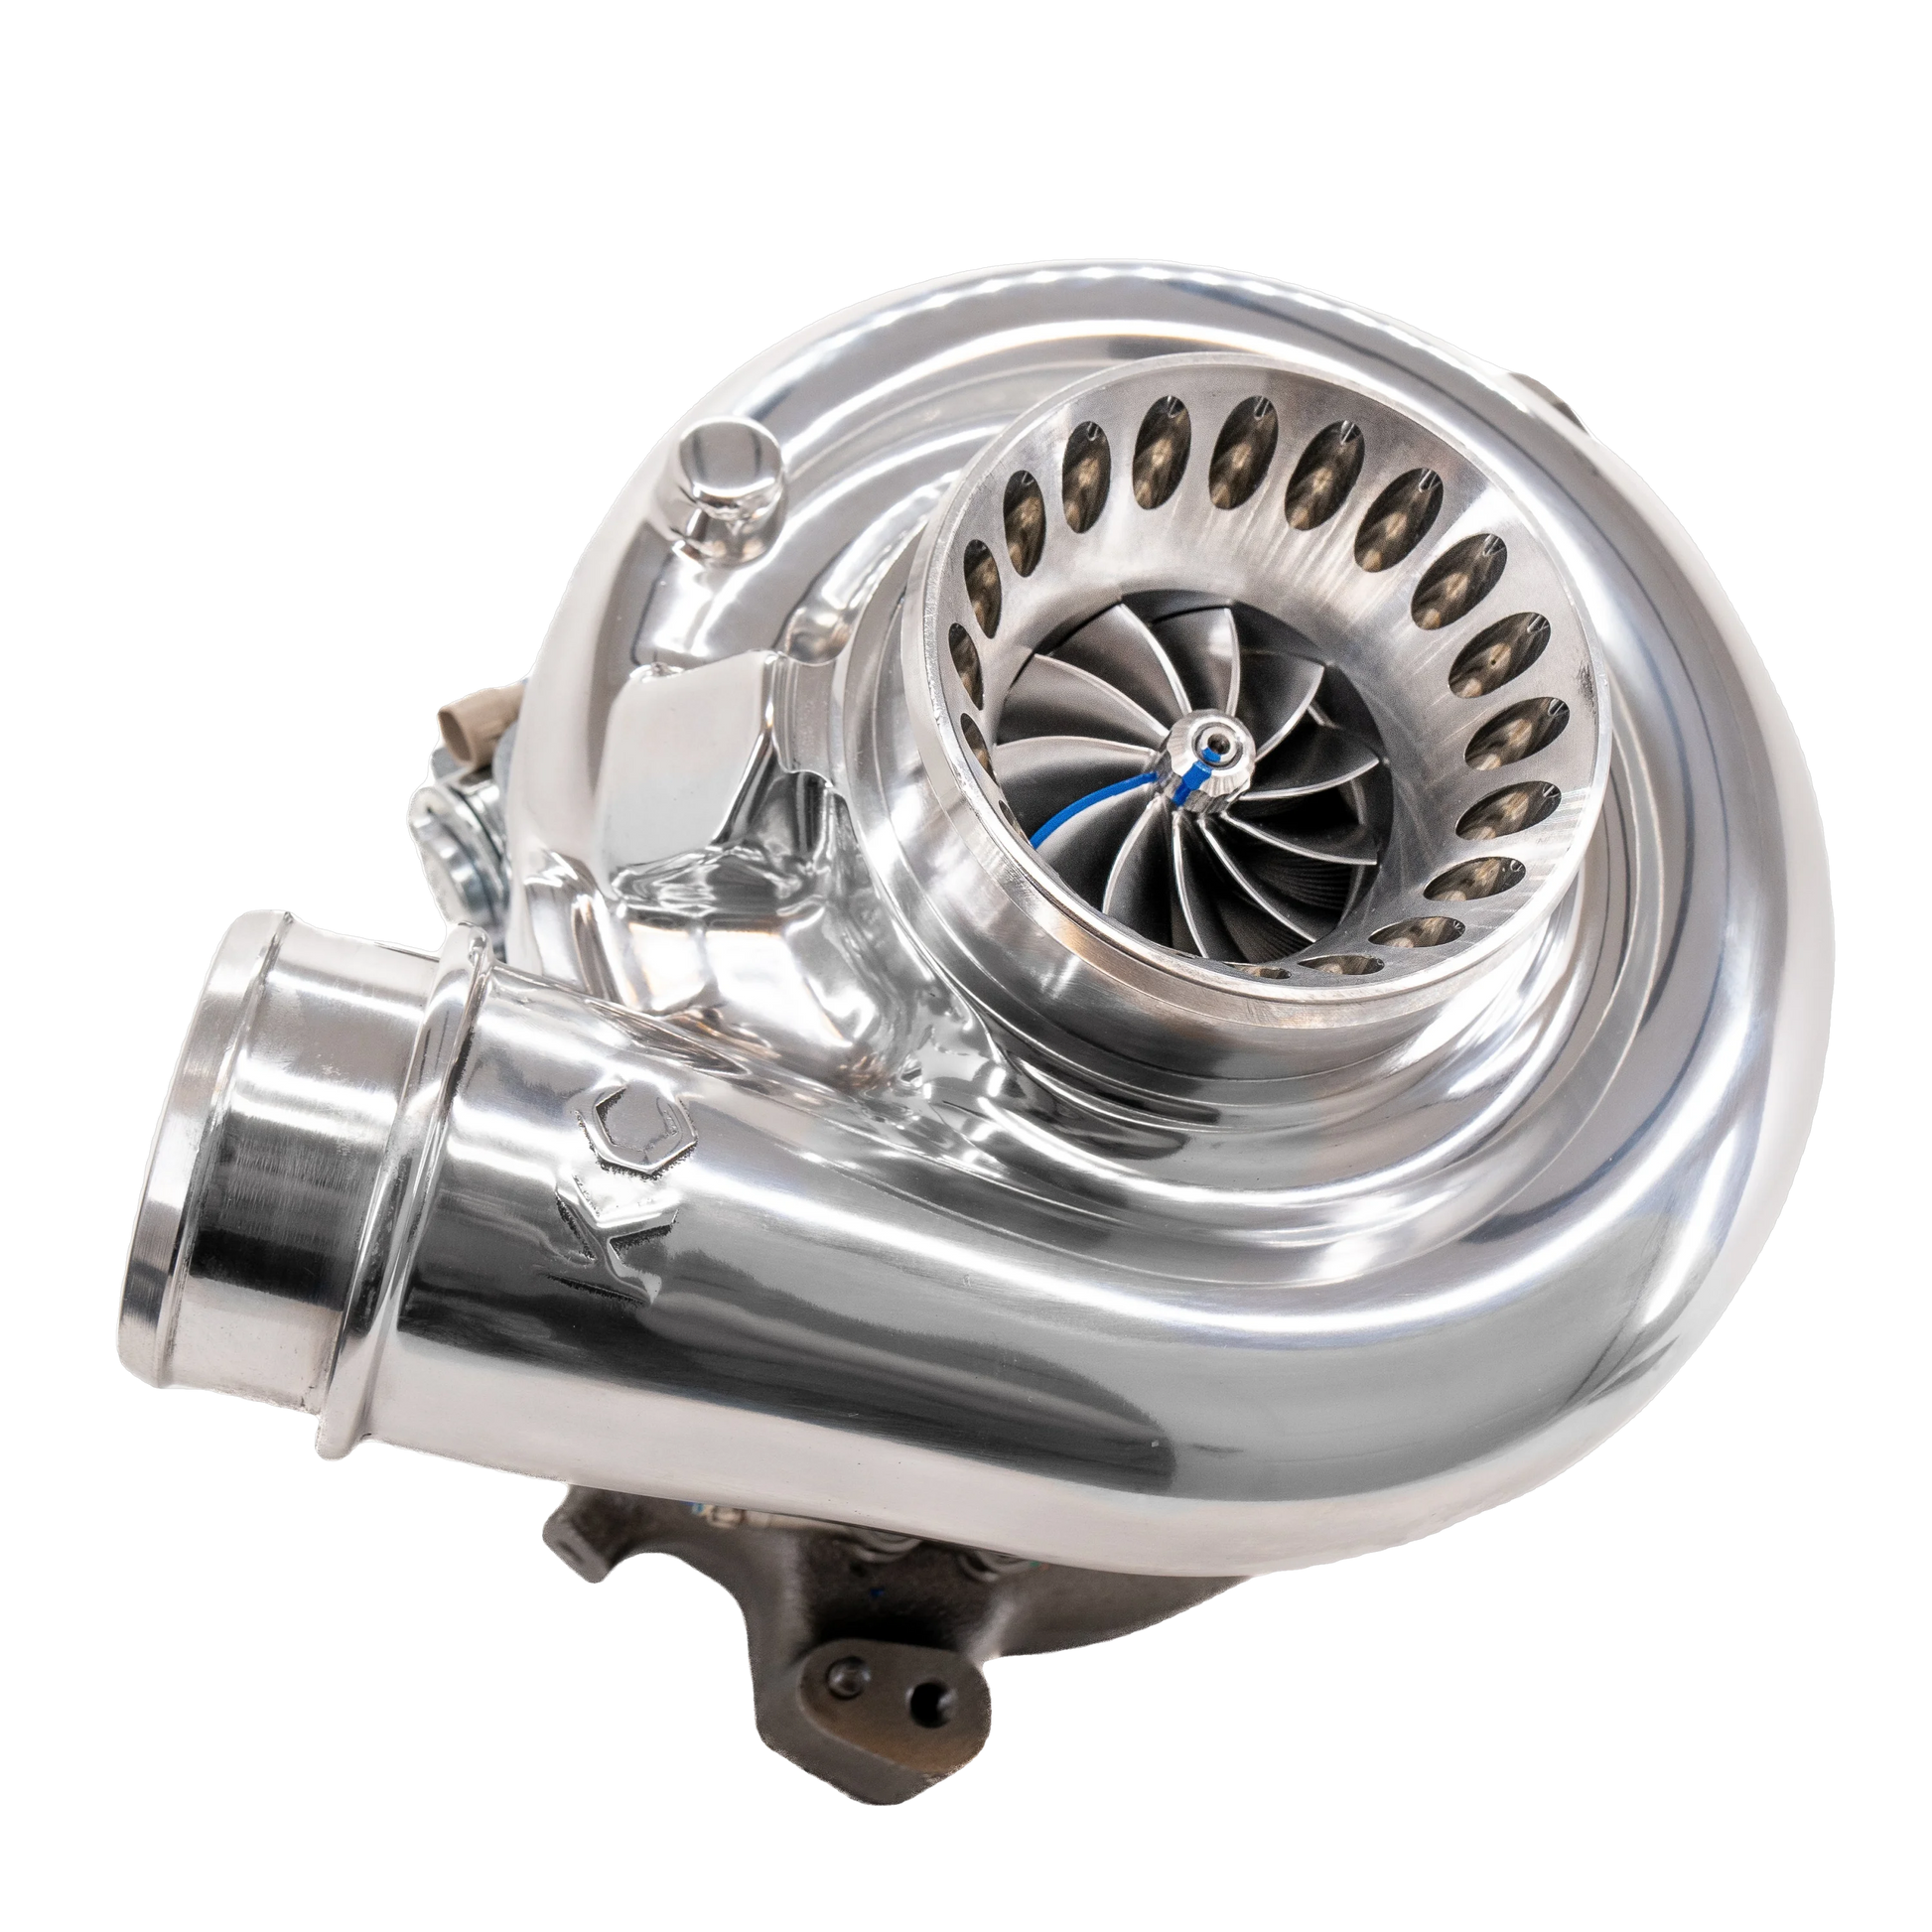 CARB EO KC Jetfire Stage 1 Turbo POLISHED for 6.0 POWERSTROKE